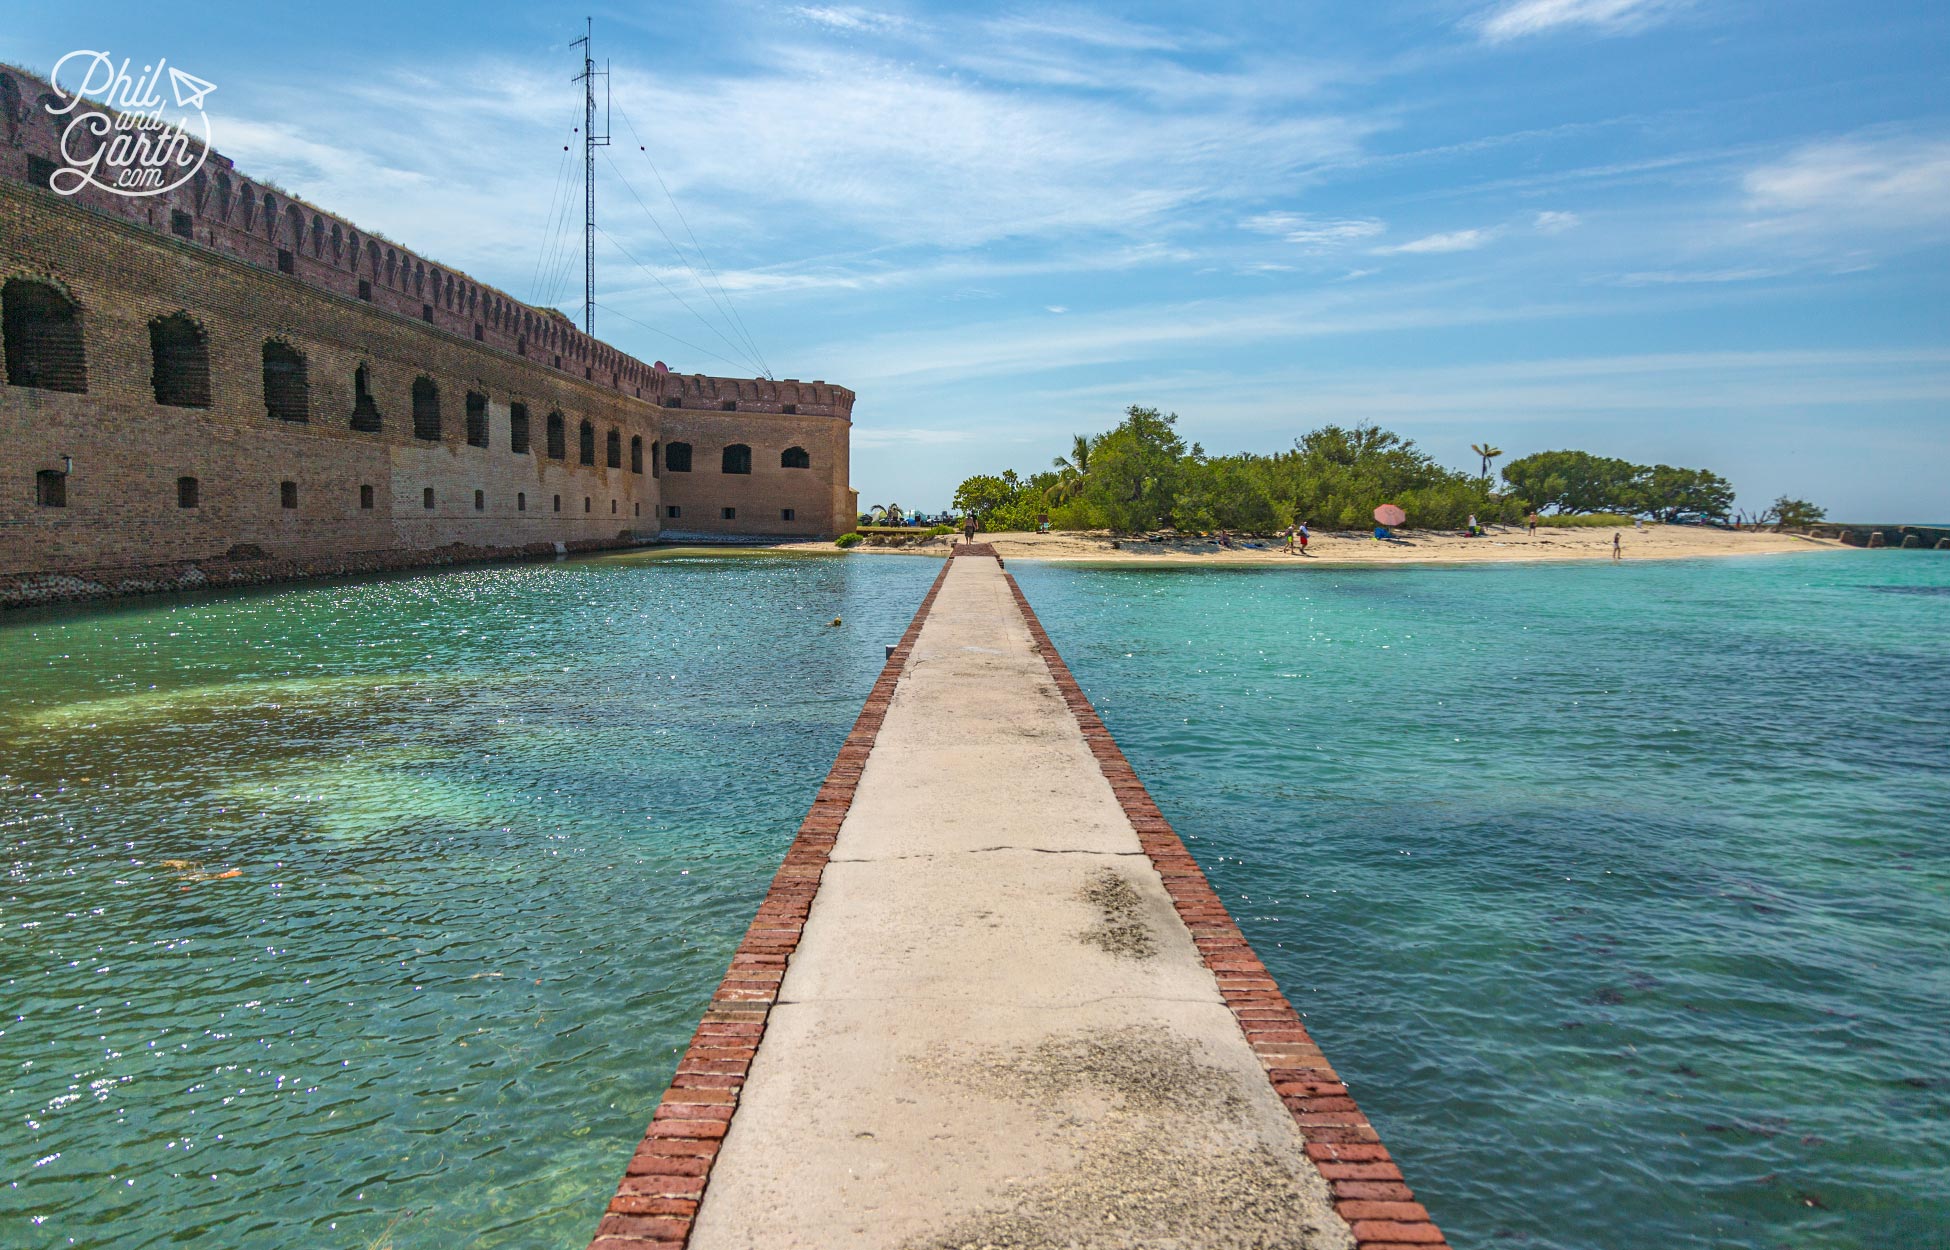 There's very little shade on Dry Tortugas, however this small beach offered a little